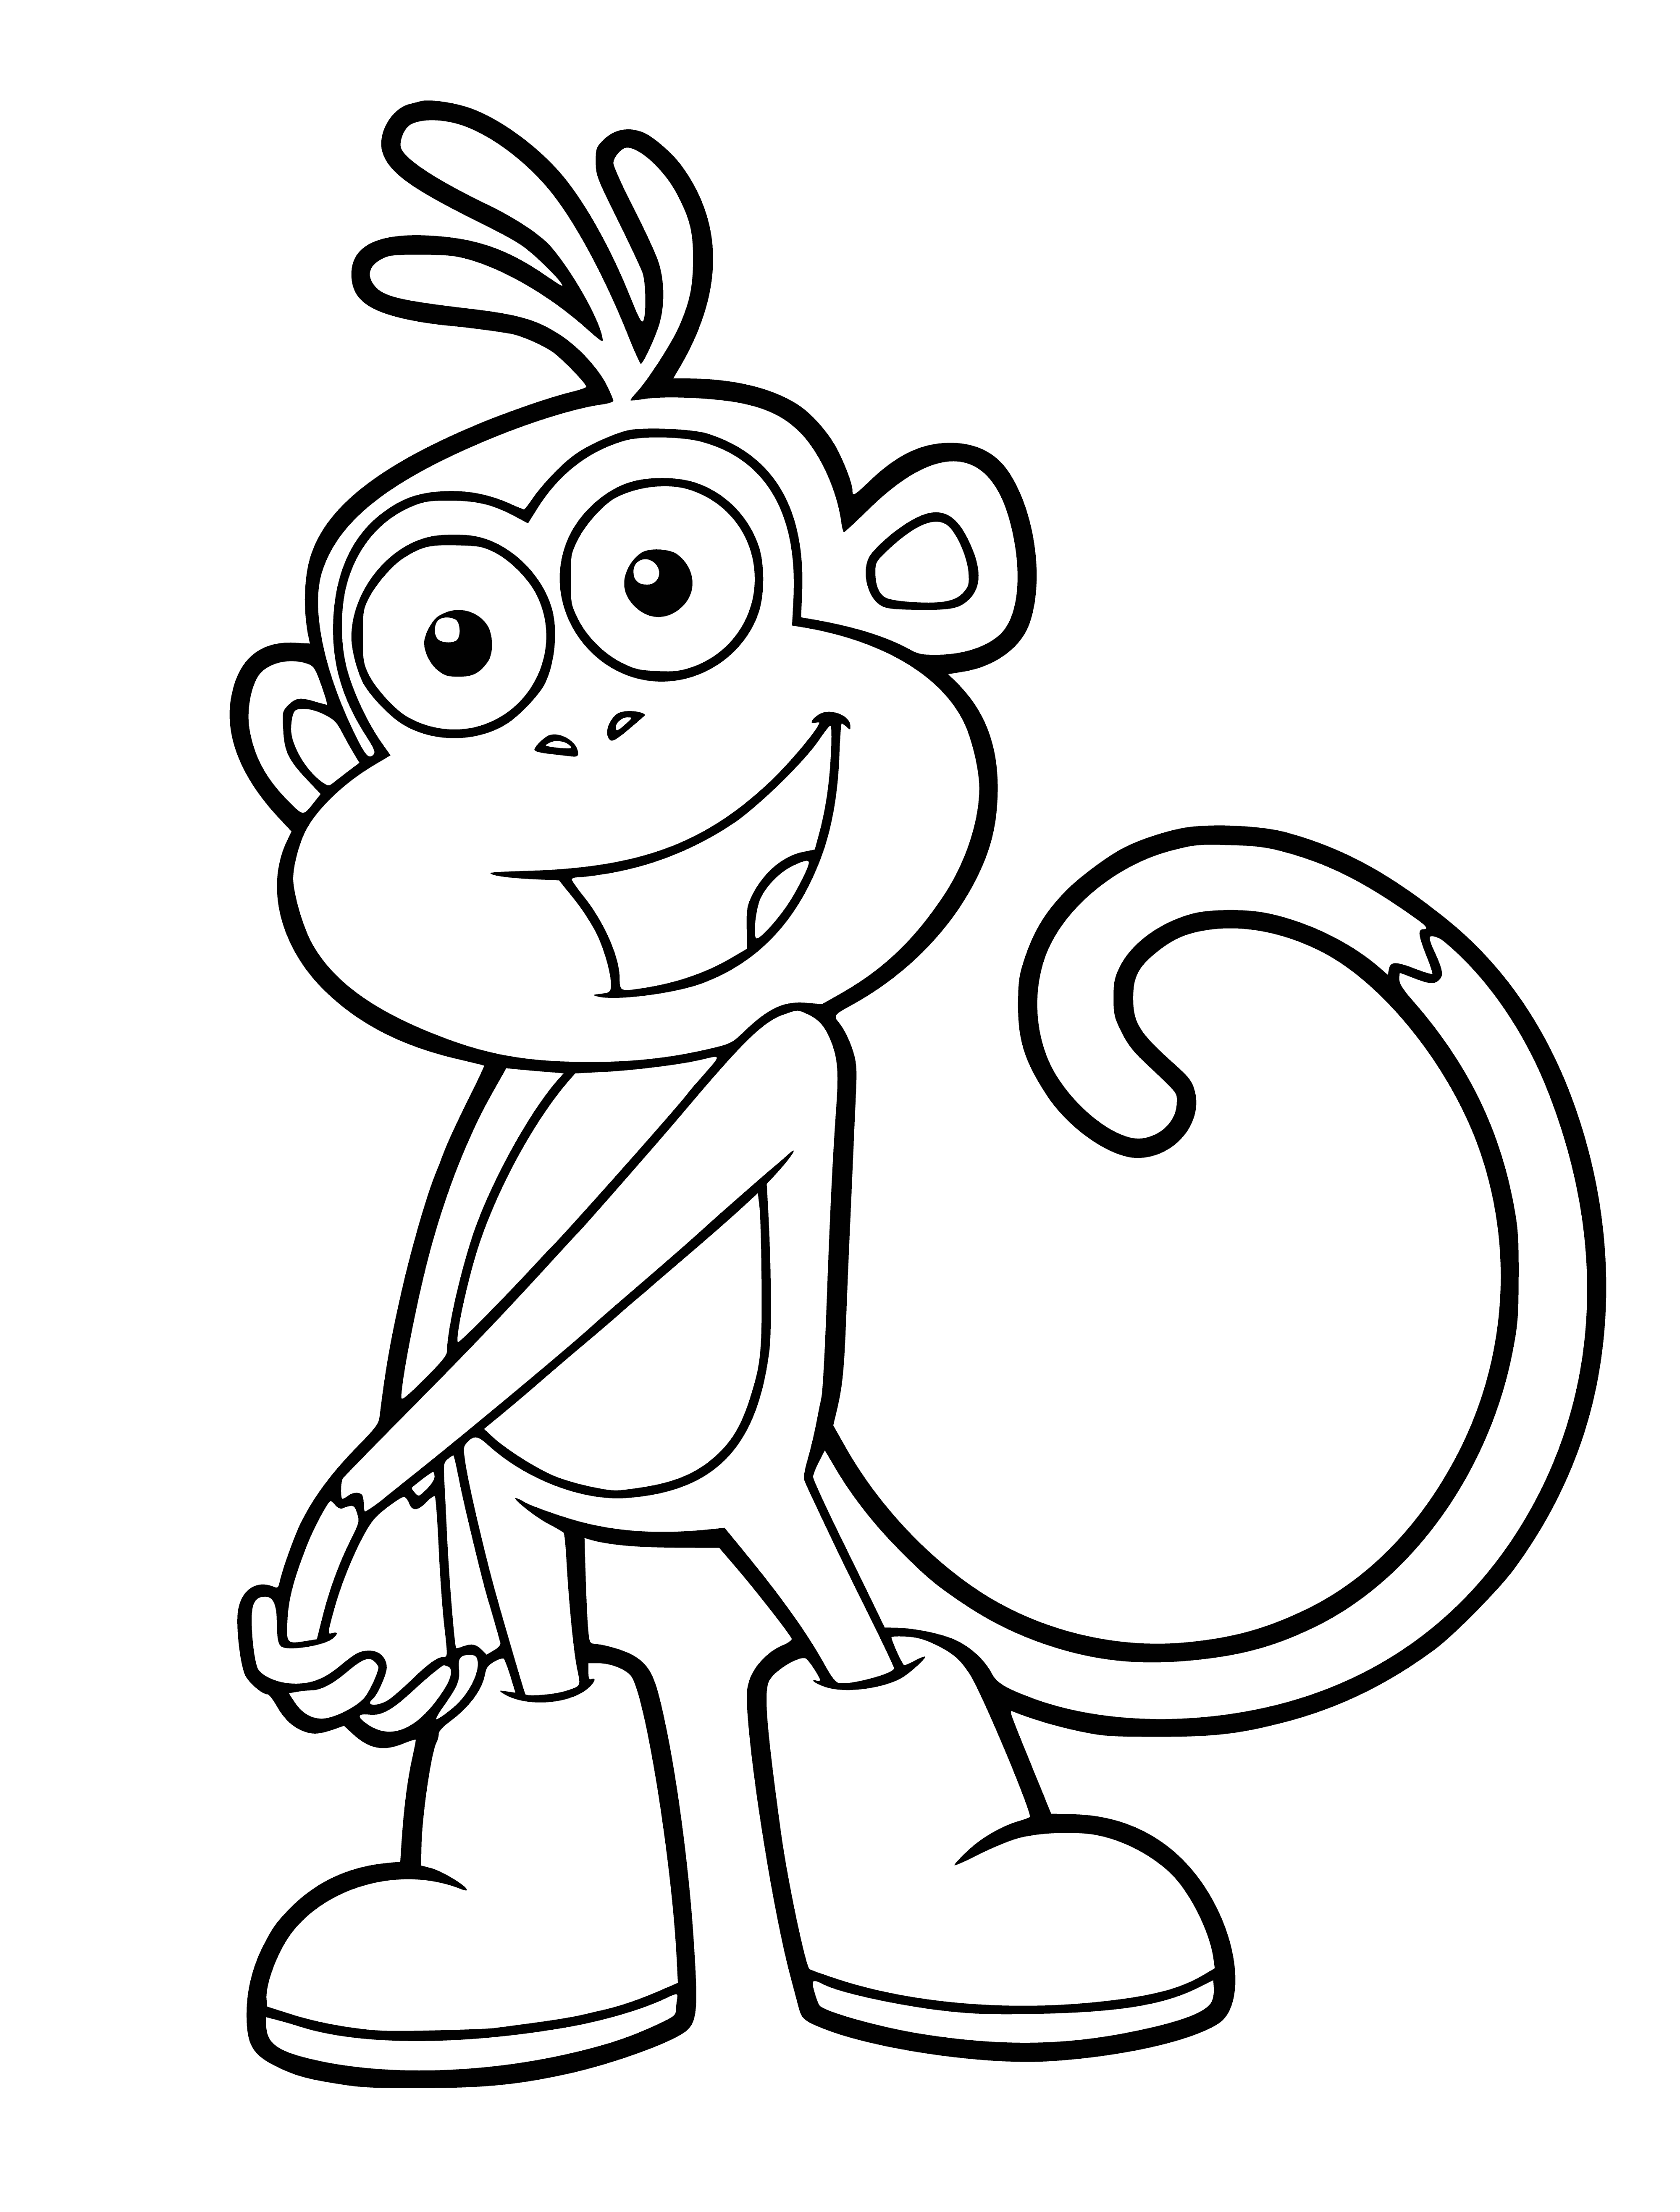 Monkey Slipper coloring page